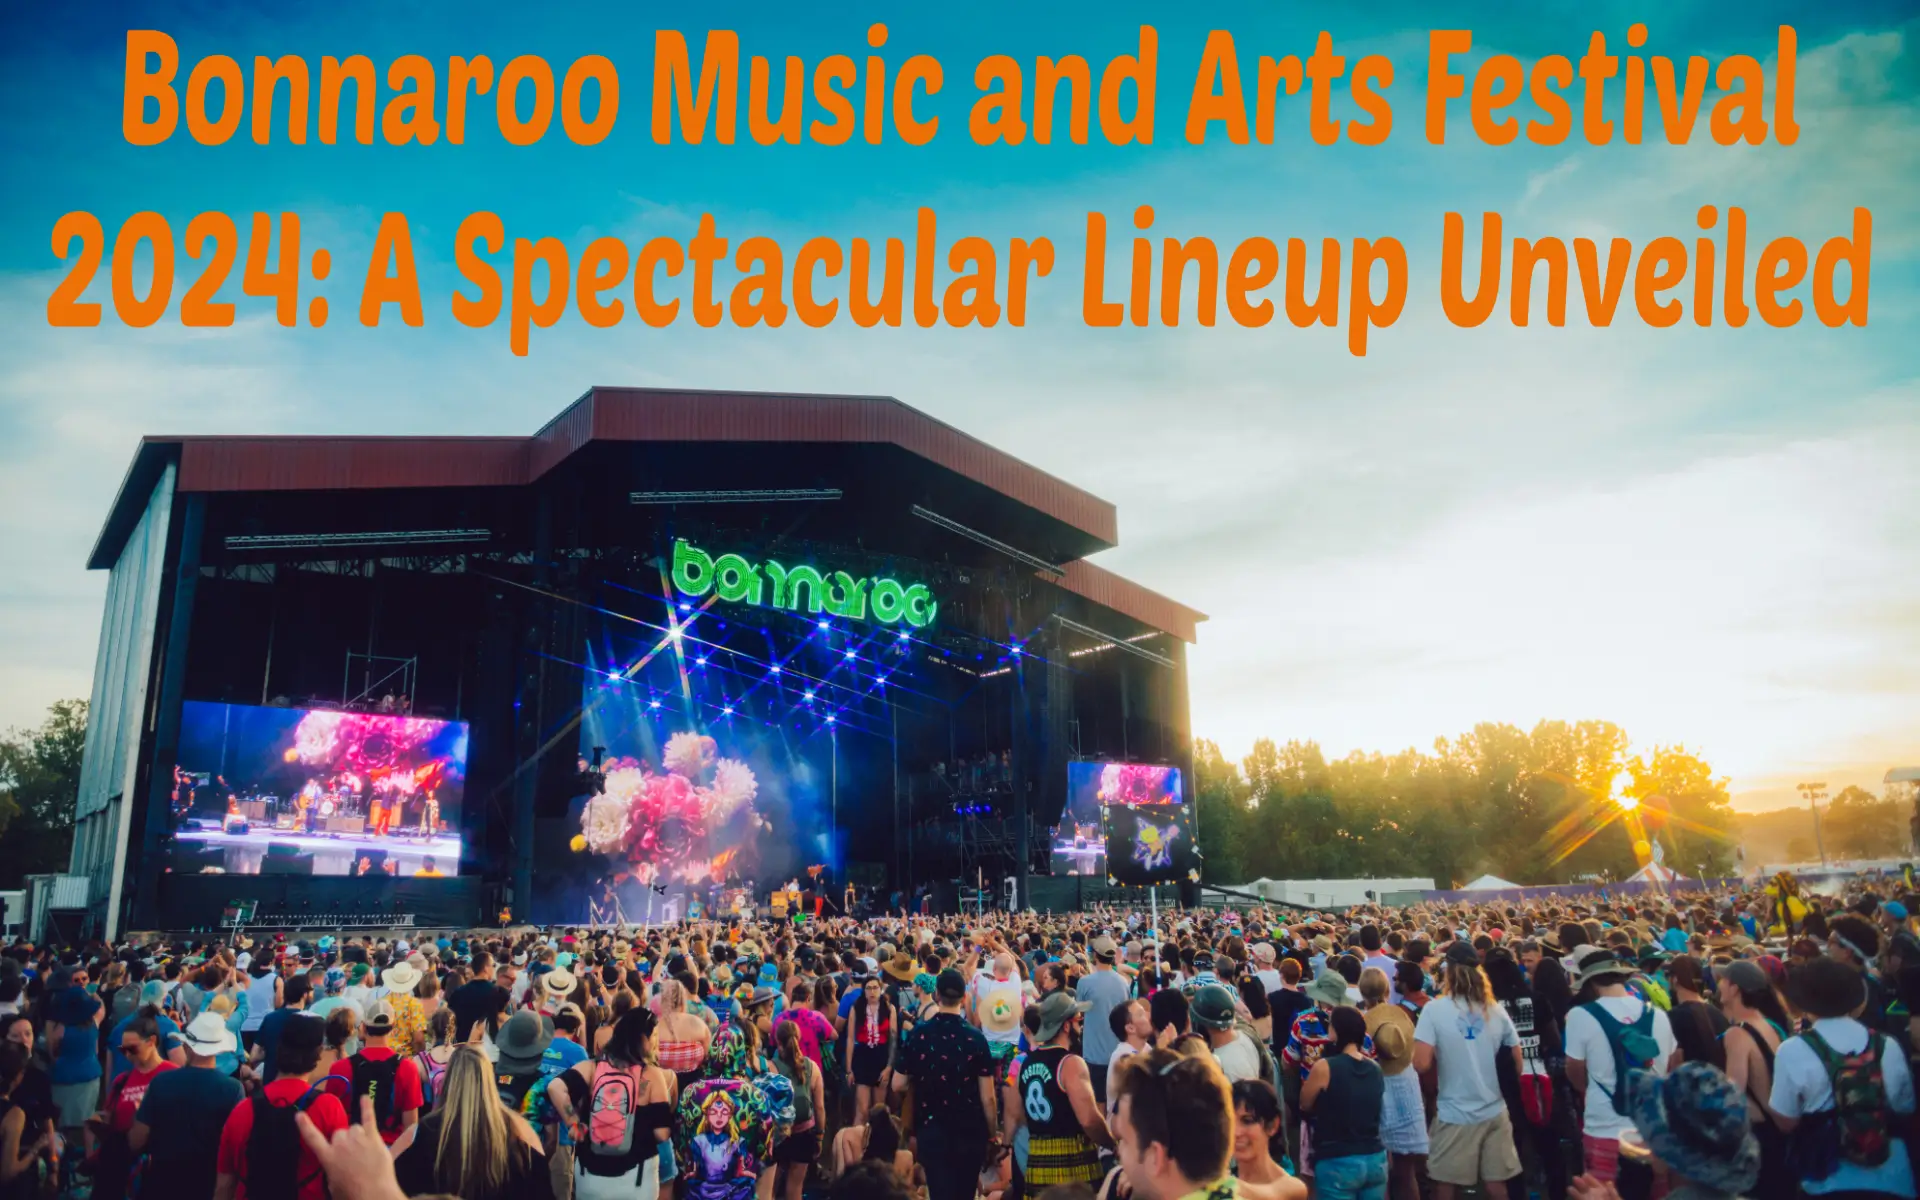 Bonnaroo Music and Arts Festival 2024 A Spectacular Lineup Unveiled